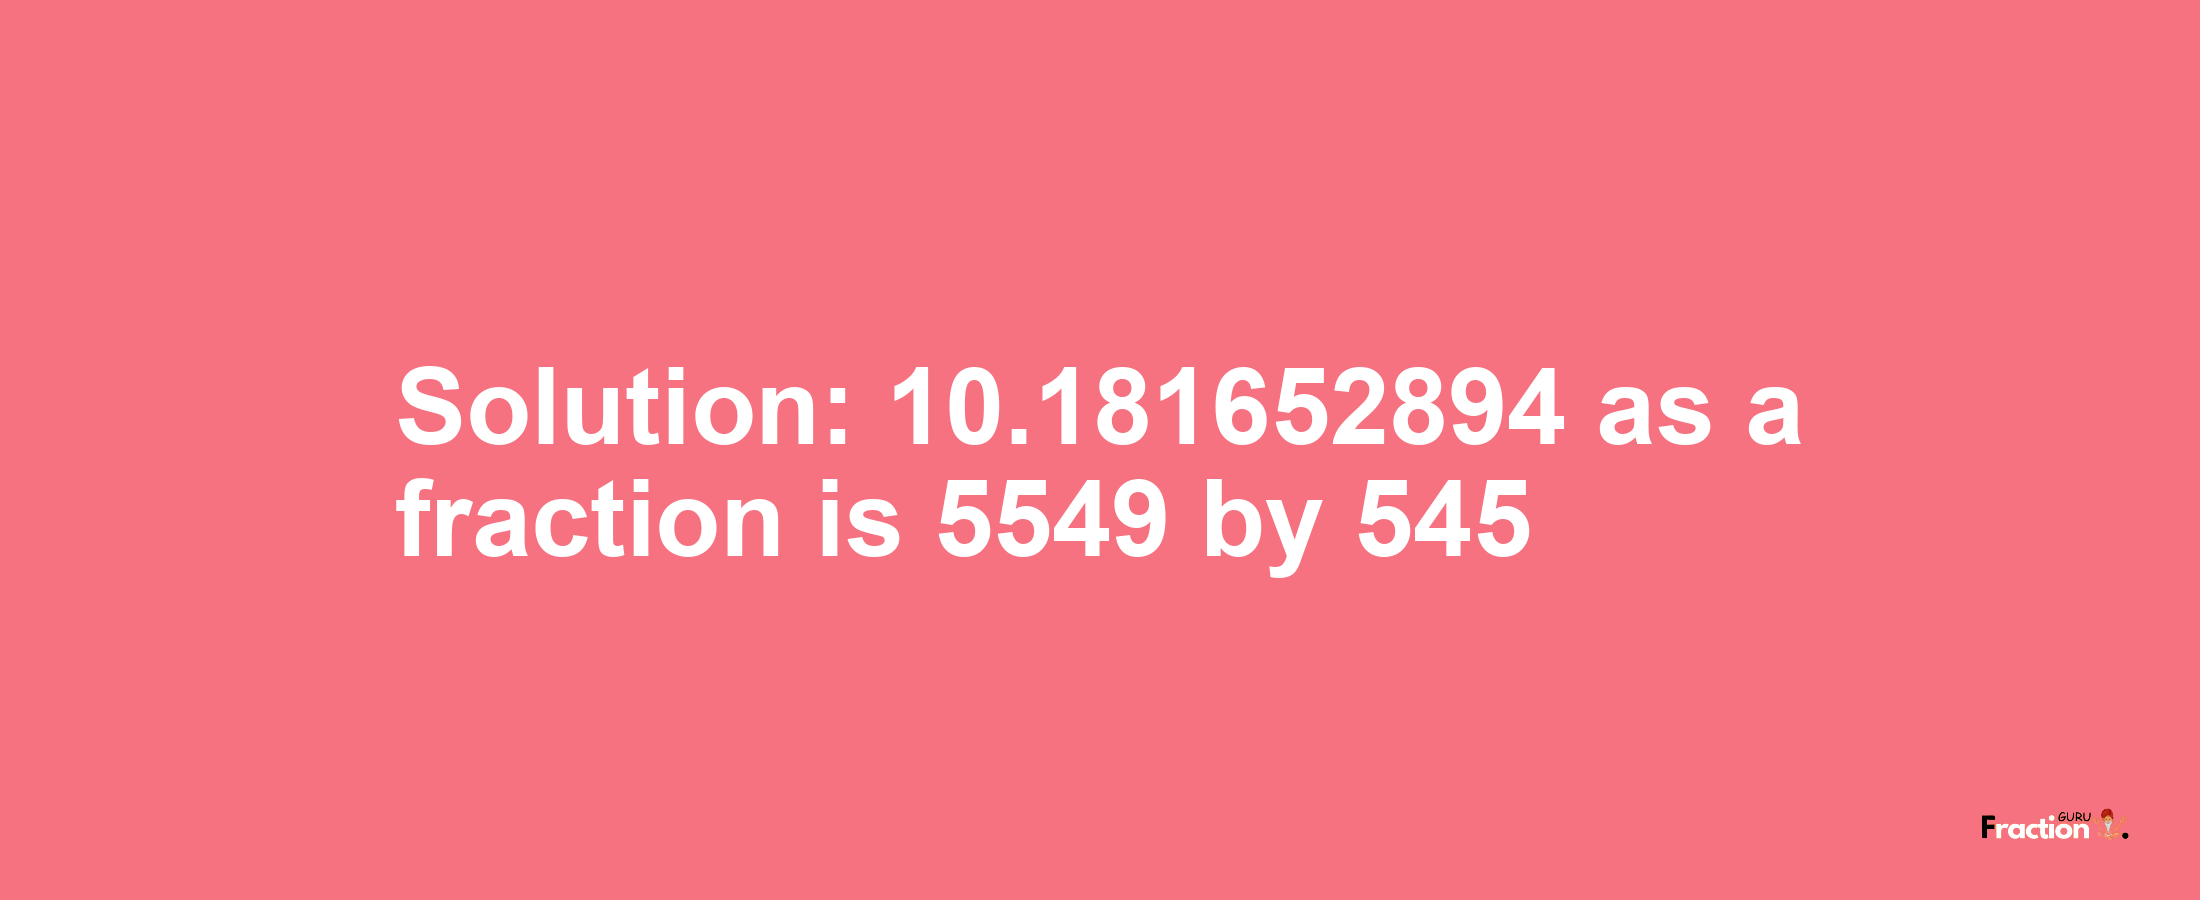 Solution:10.181652894 as a fraction is 5549/545